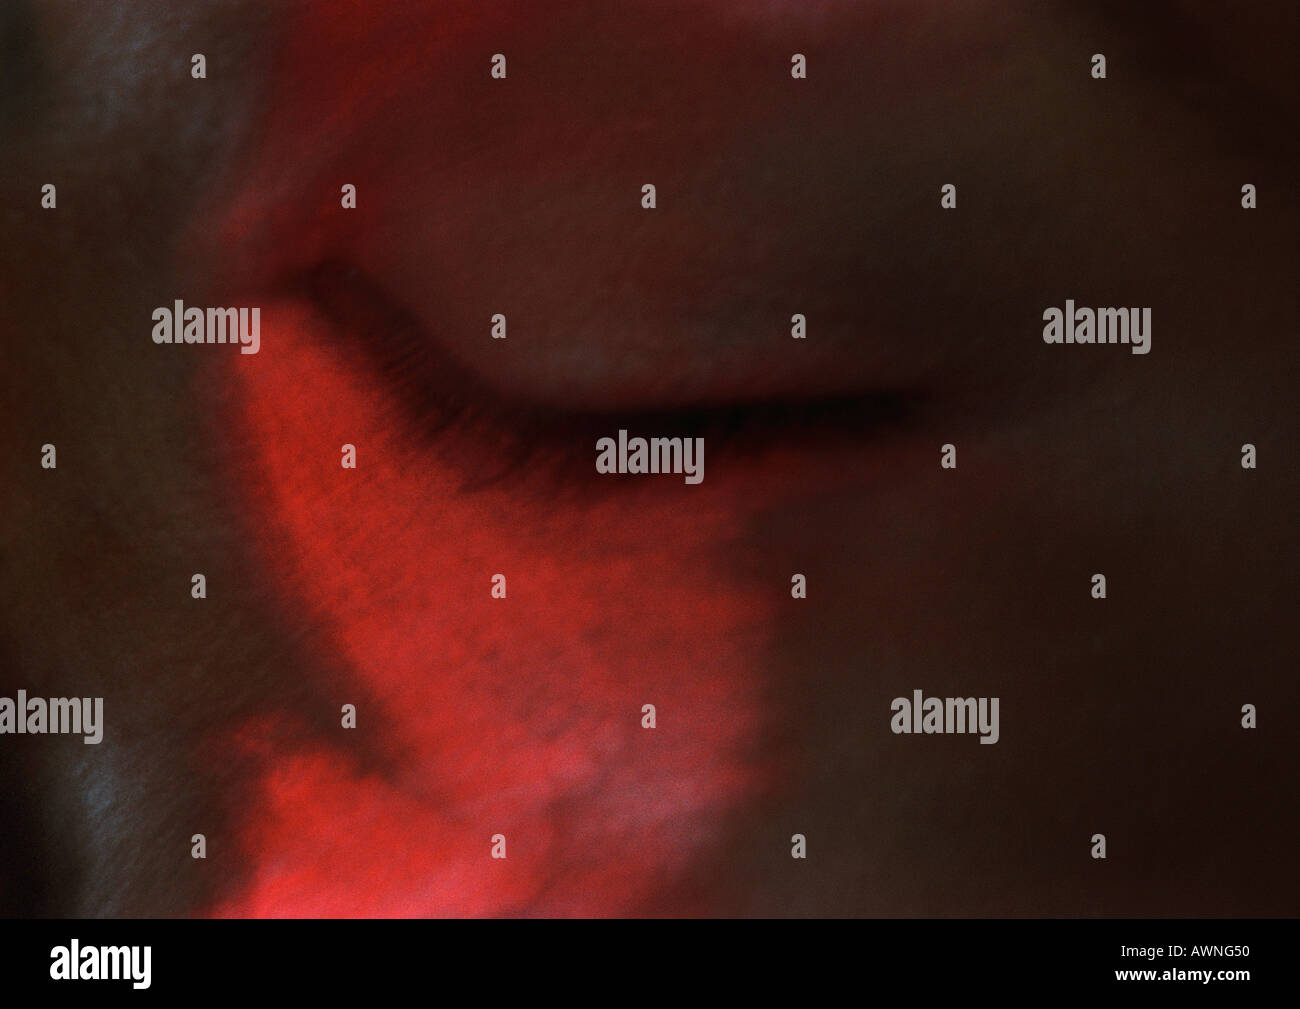 Woman's eye closed, red on face, blurred close up. Stock Photo